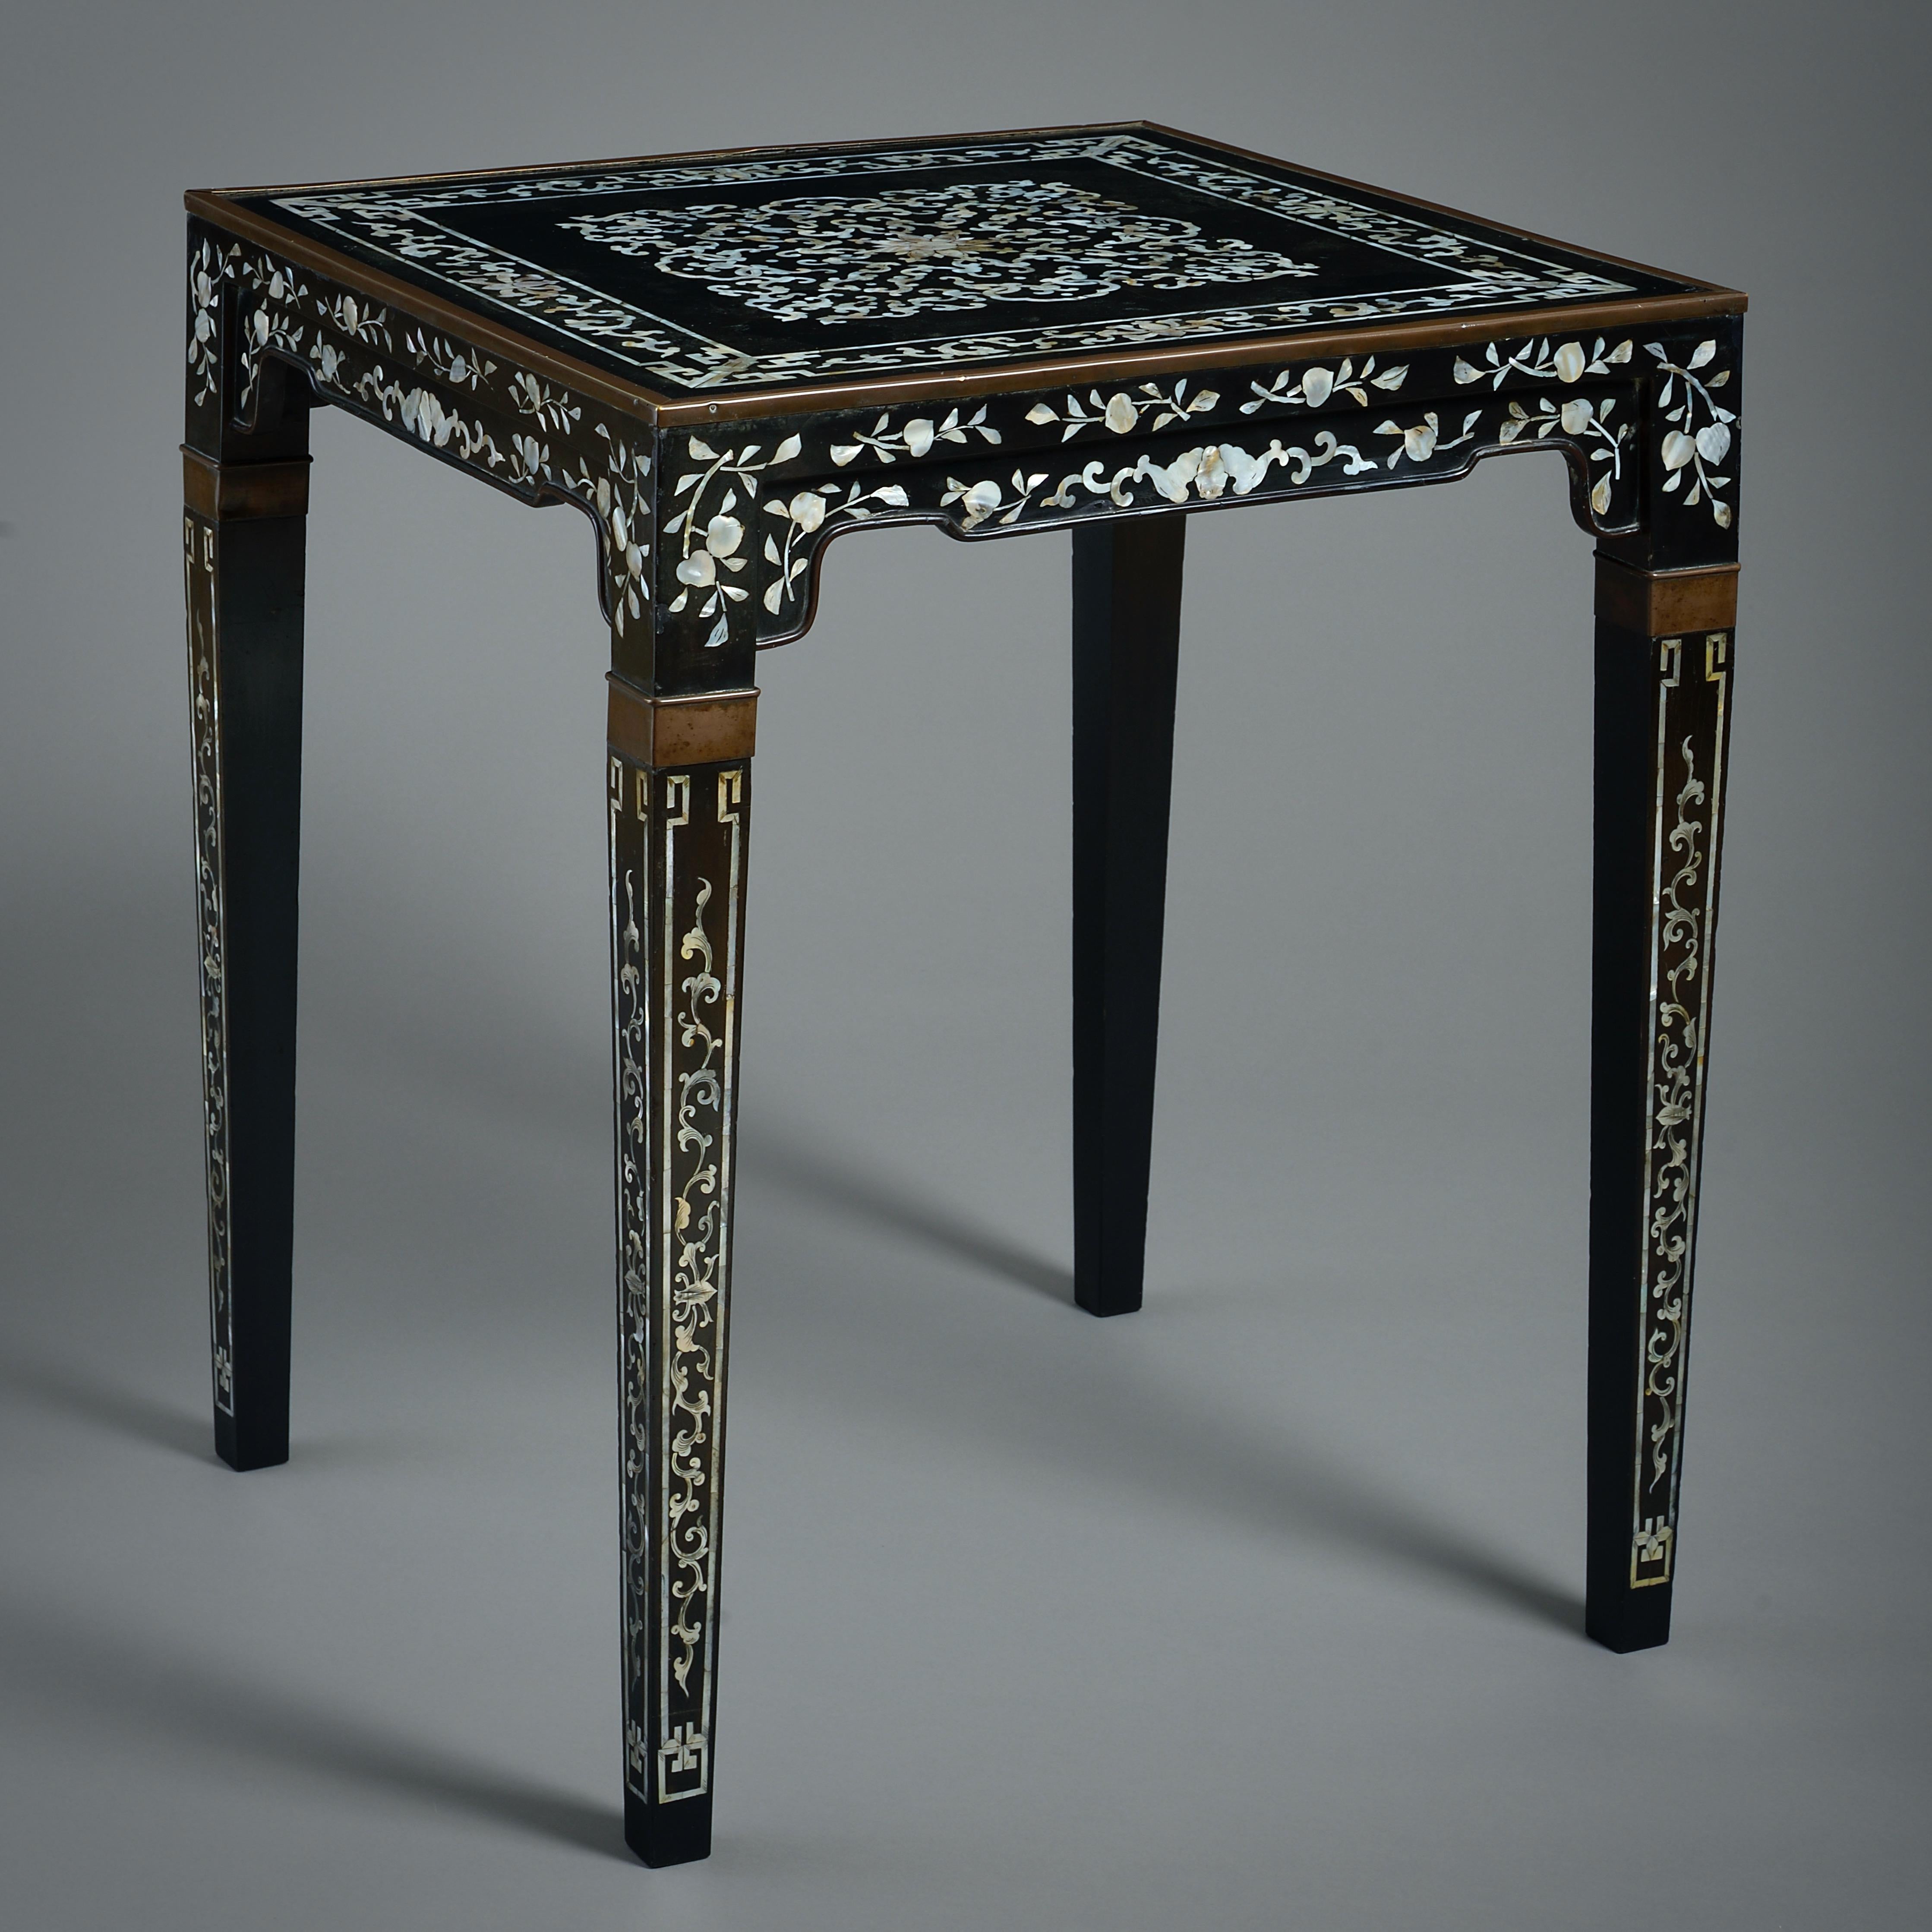 A CHINESE MOTHER-OF-PEARL AND BLACK LACQUER TABLE, 19TH CENTURY.

Inlaid throughout with intersecting scrolls, the square top with a brass edge on square tapering legs.